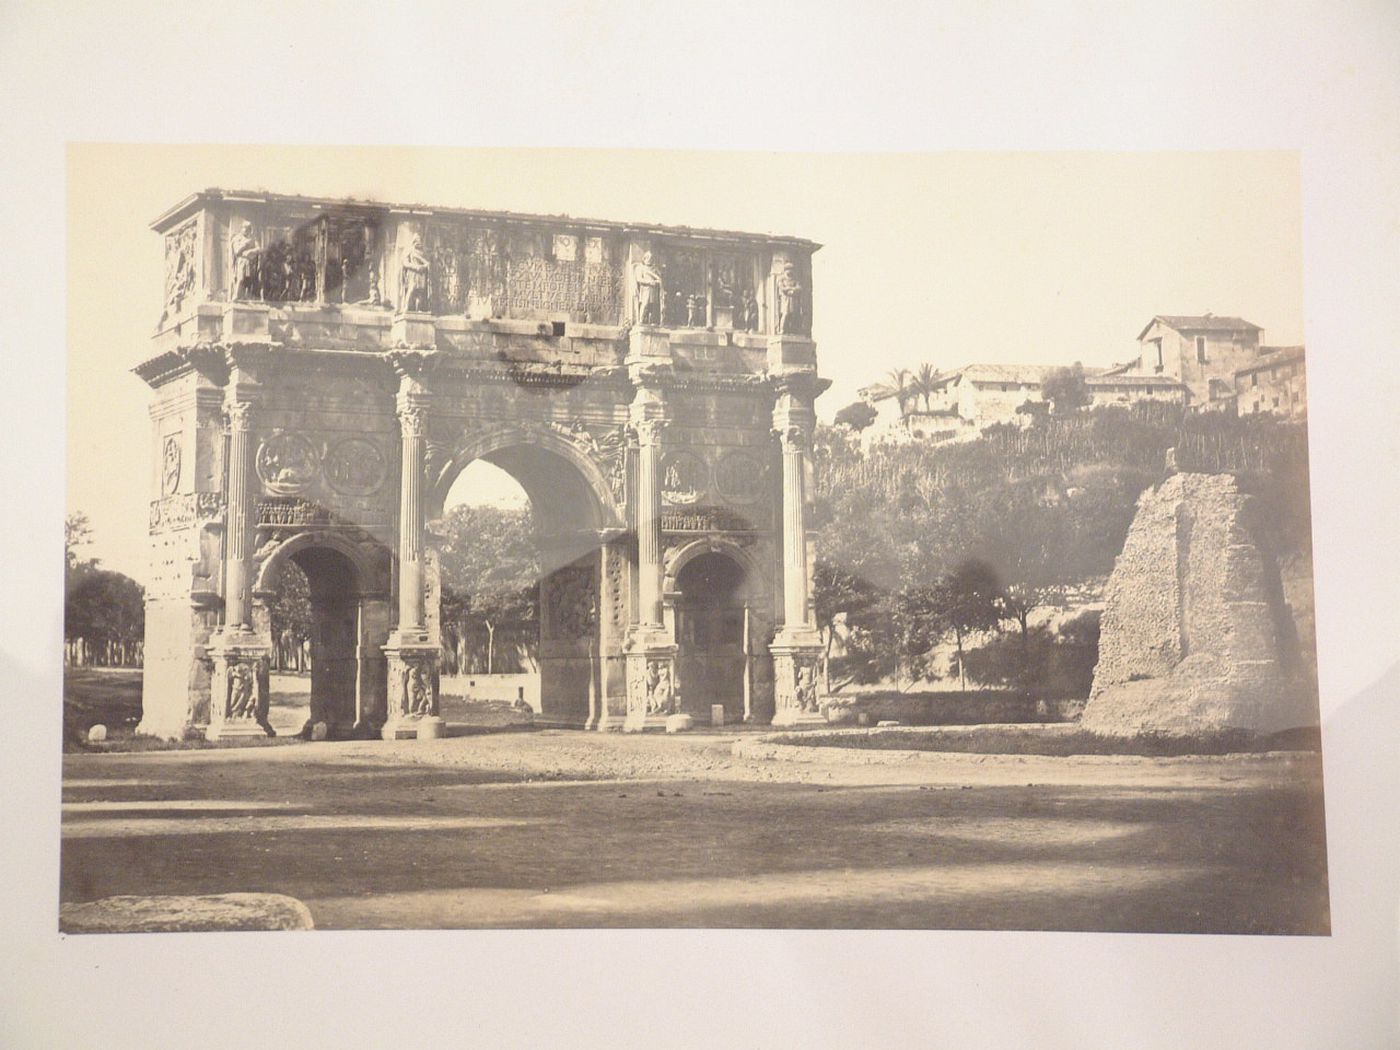 View of the Arch of Constantine and the Meta Sudans, Rome, Italy